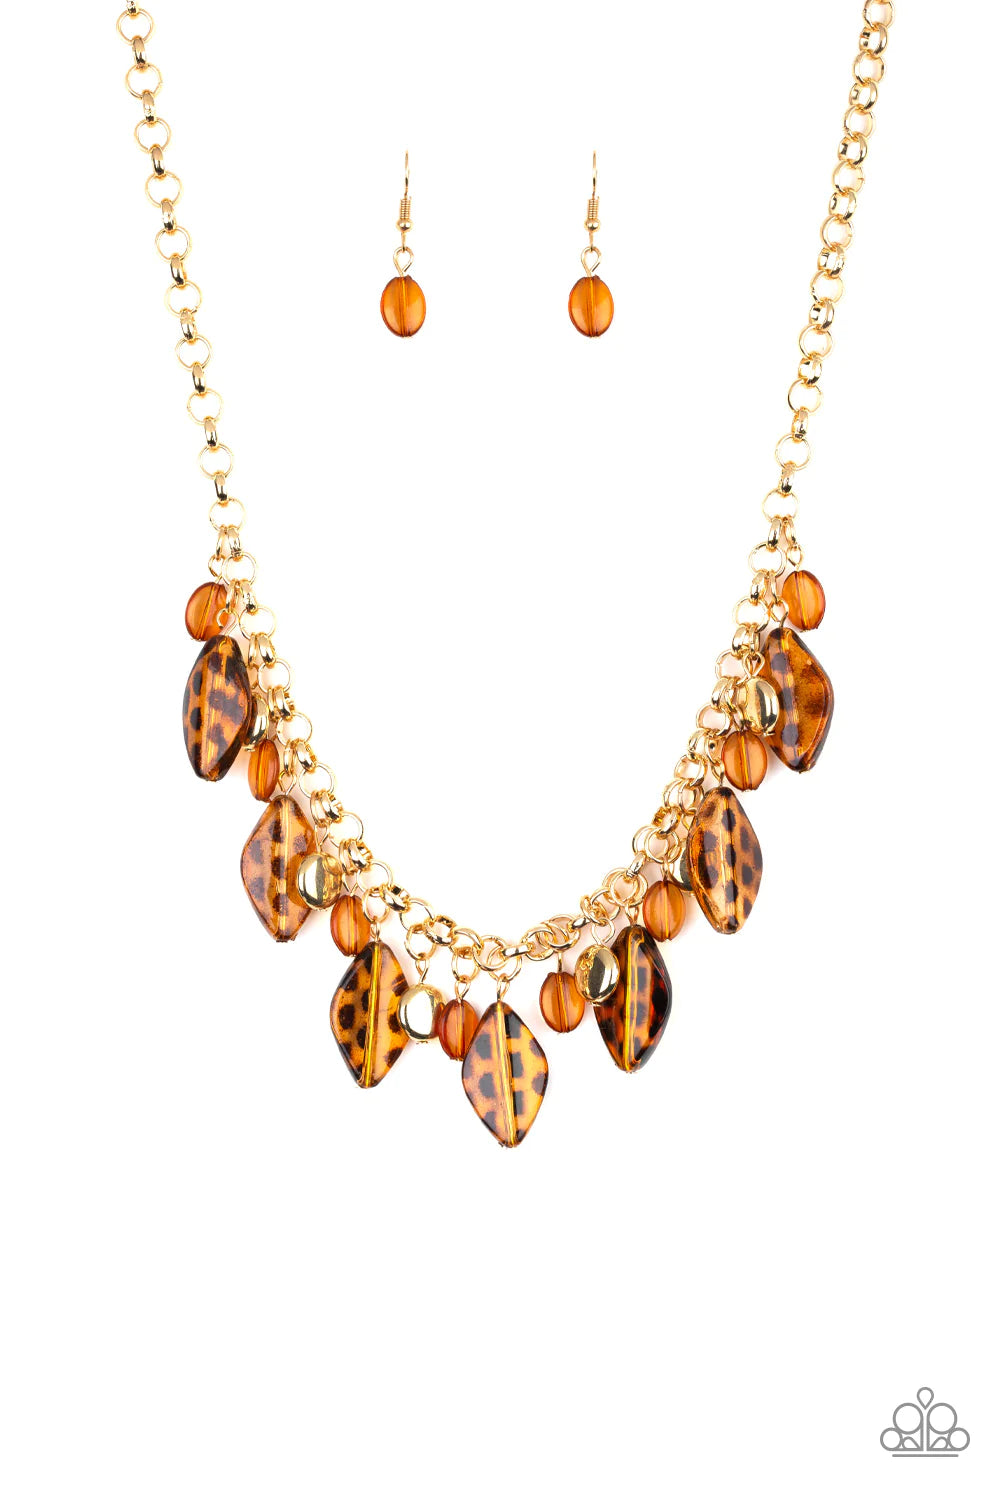 Paparazzi Hissy Fit Necklace